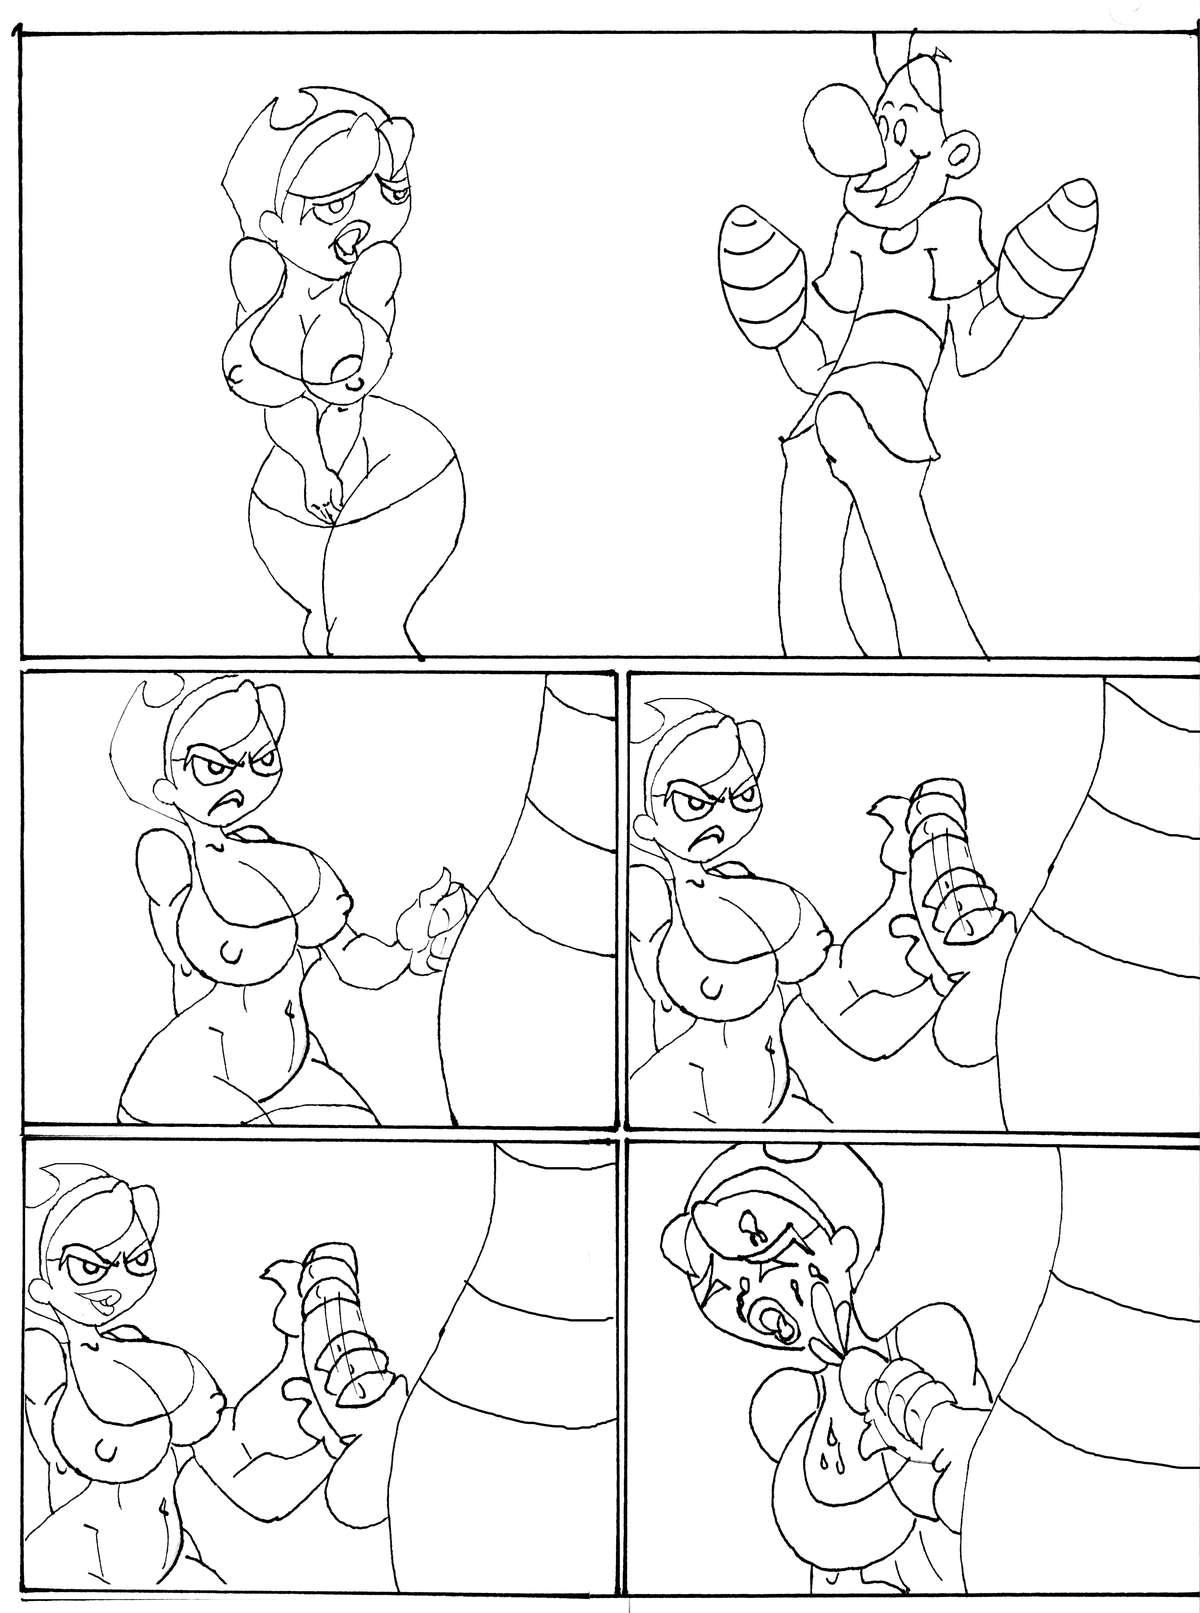 Petera billy y mandy - The grim adventures of billy and mandy Lingerie - Page 5